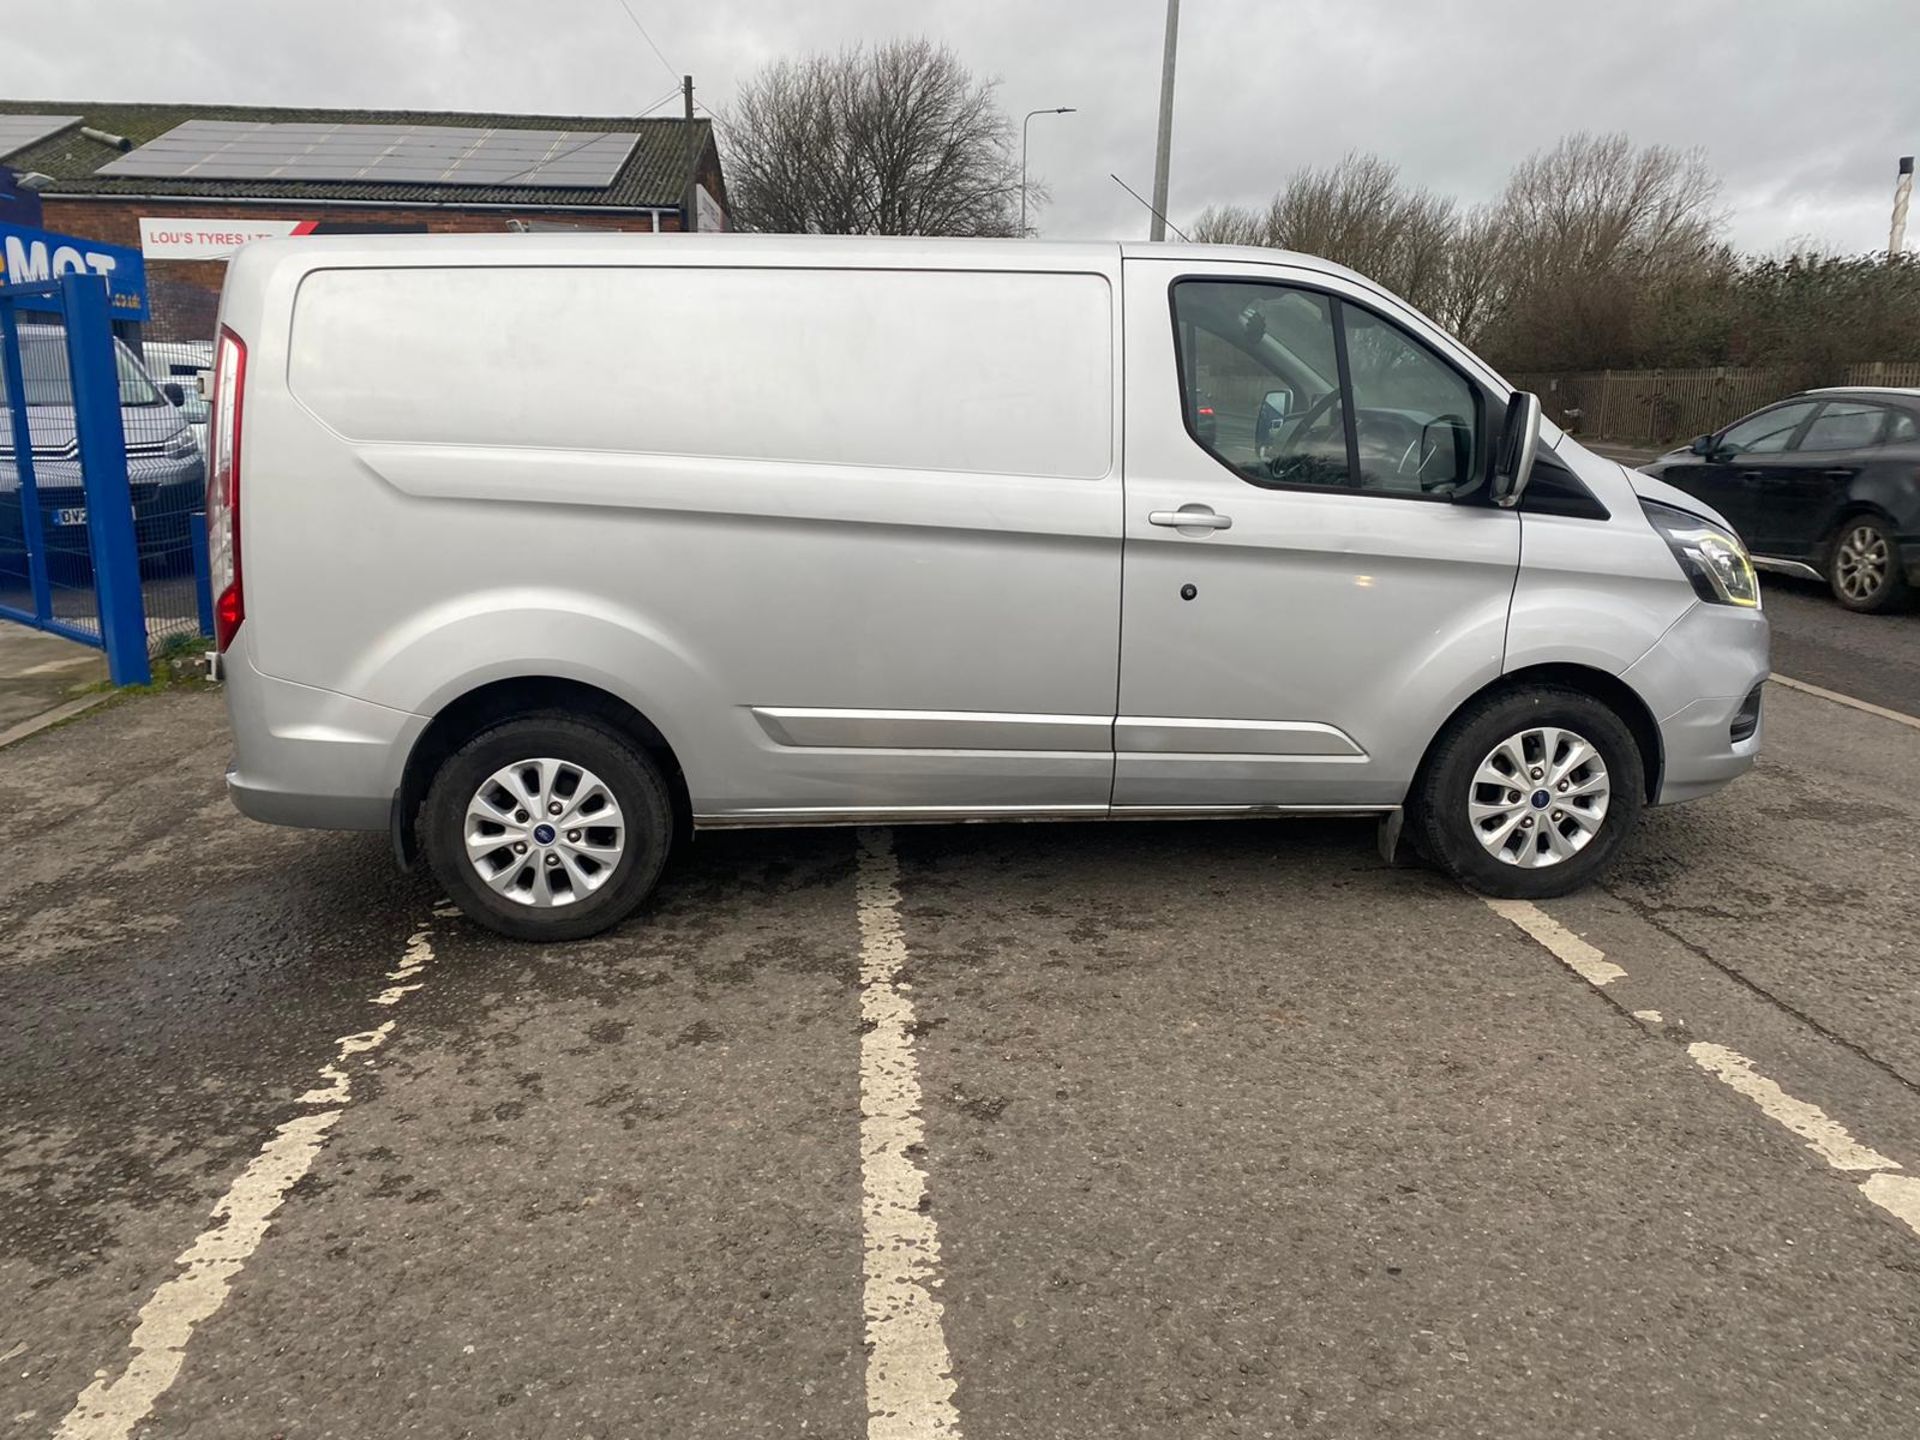 2018 68 FORD TRANSIT LIMITED PANEL VAN - 103K MILES - EURO 6 - FACELIFT MODEL - AIR CON - Image 6 of 10